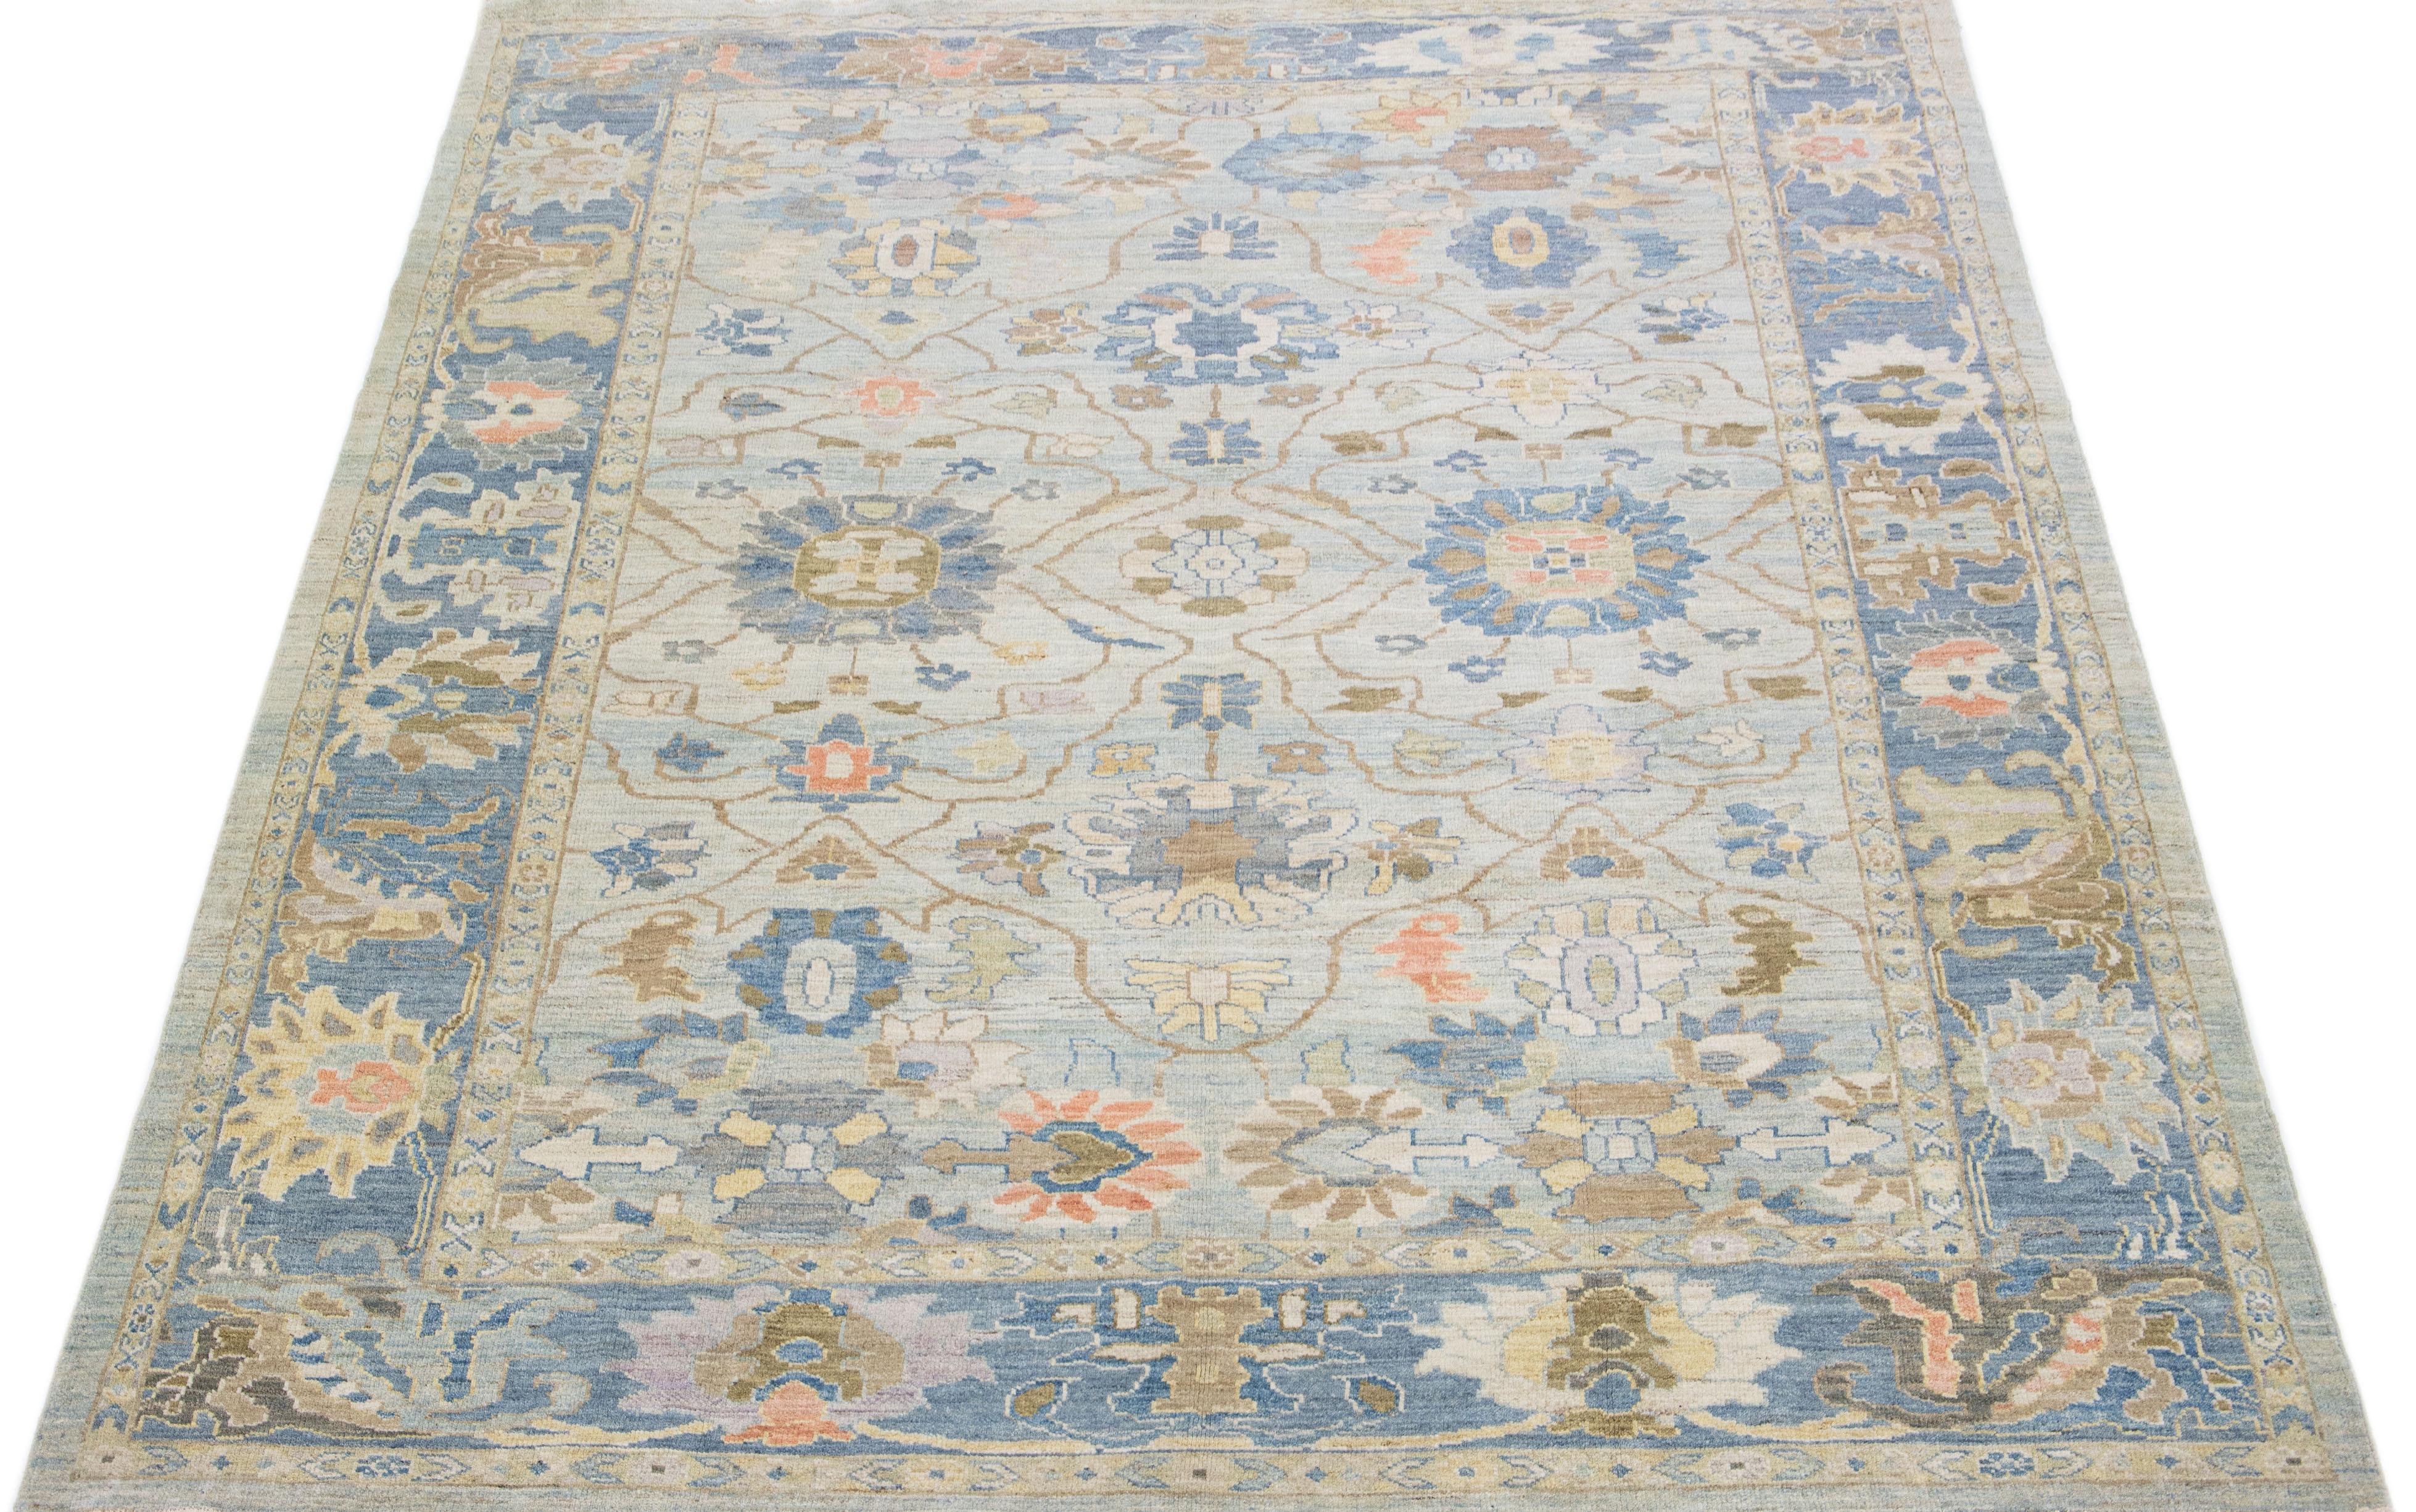 Beautiful modern Sultanabad hand knotted wool rug with a light blue color field. This rug has a navy blue-designed frame with peach, tan, and brown accents in a gorgeous all-over floral motif.

This rug measures: 9'6